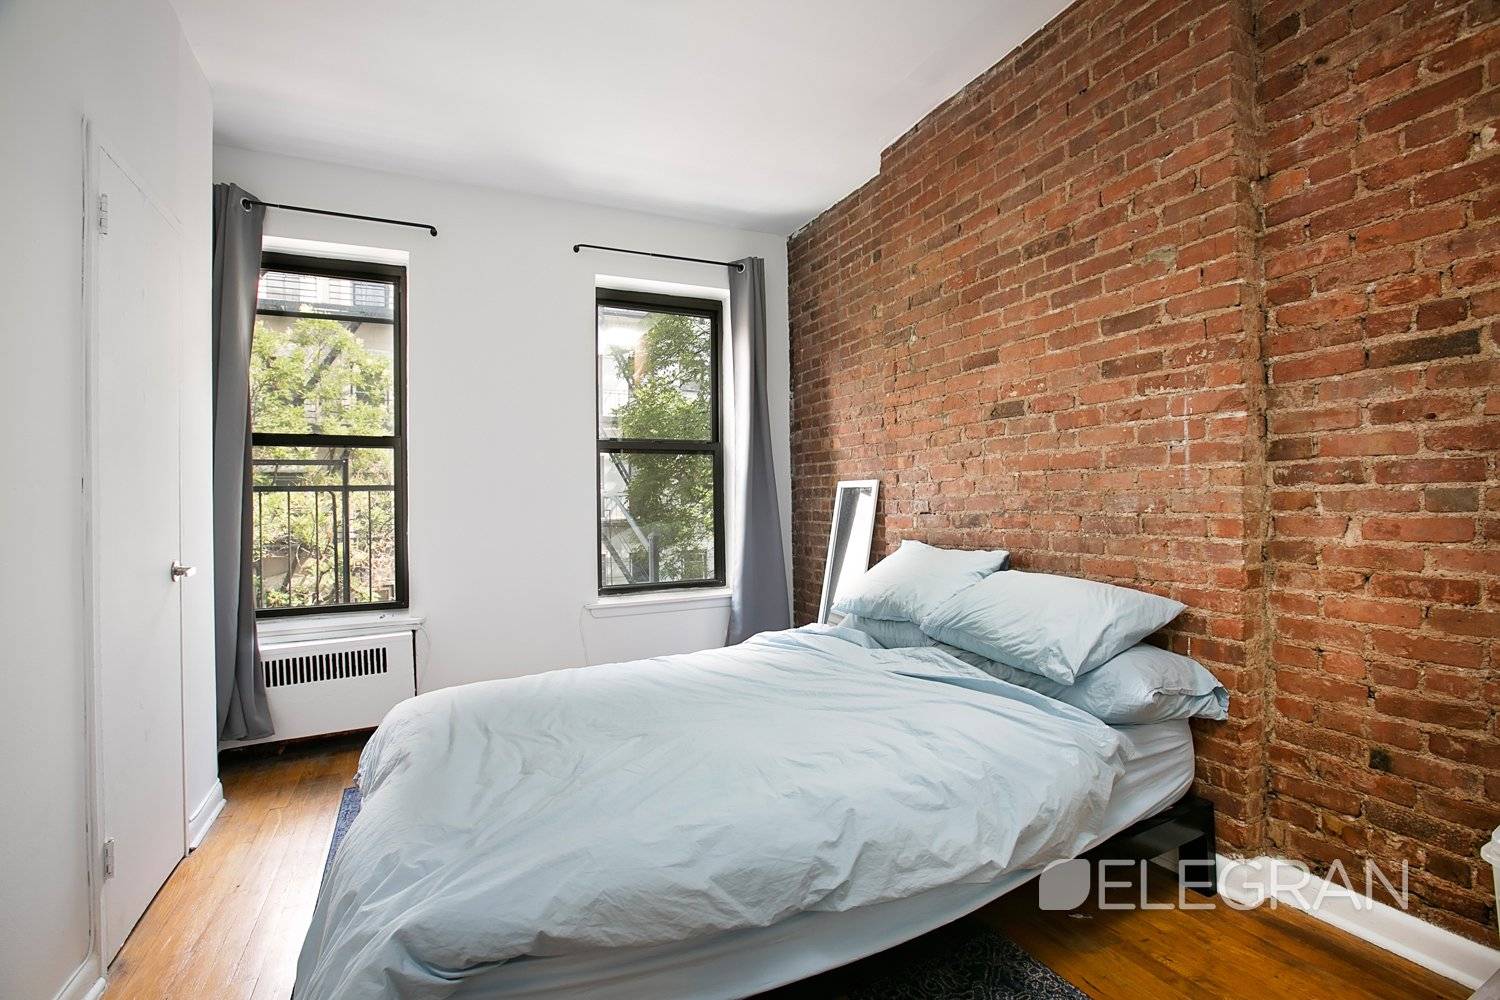 Available July 1st One bedroom featuring oversized windows and lots of natural light.